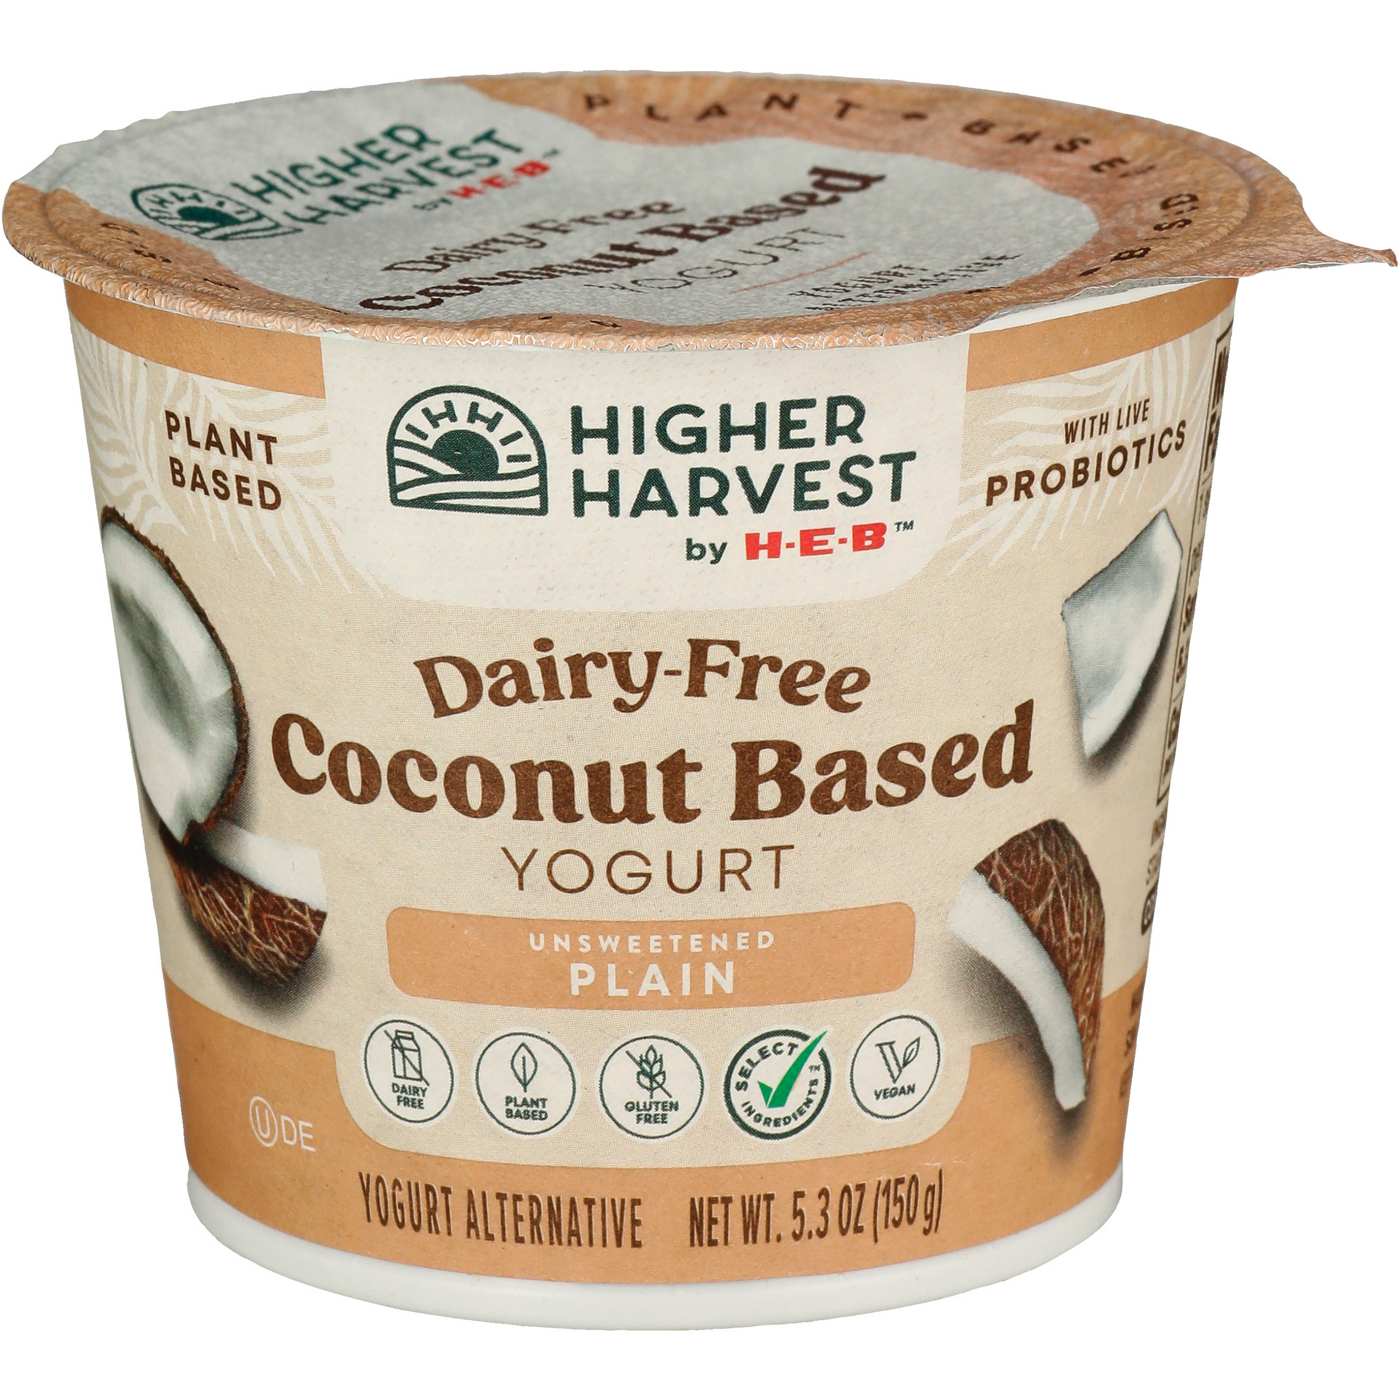 Higher Harvest by H-E-B Dairy-Free Coconut-Based Yogurt – Unsweetened Plain; image 3 of 3